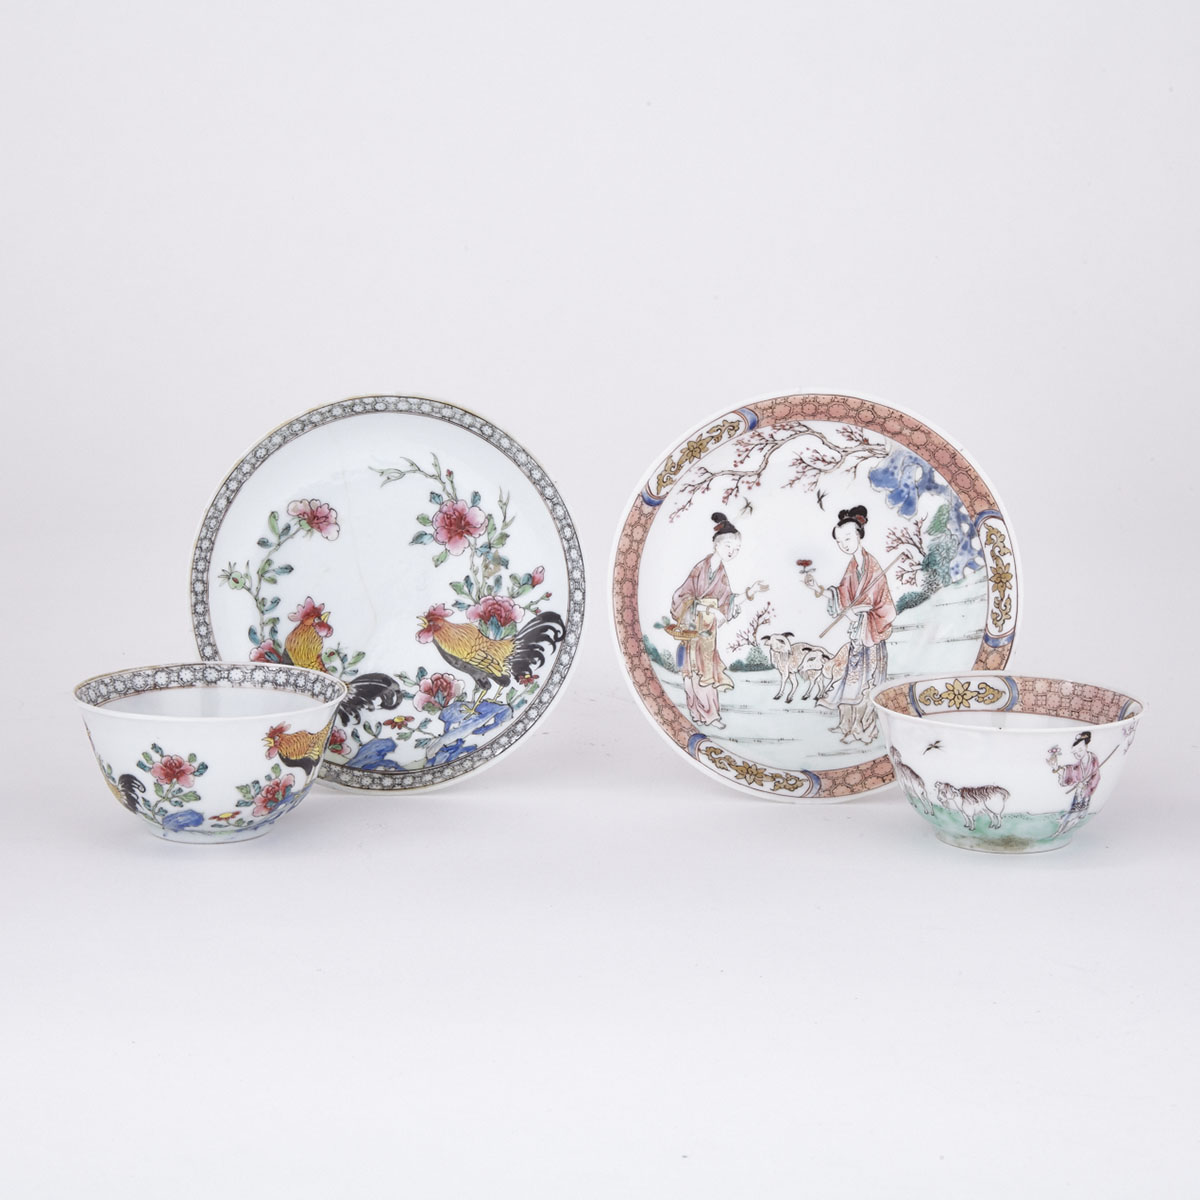 Pair of Export Famille Rose Cups and Saucers, Yongzheng Period (1723-1735)